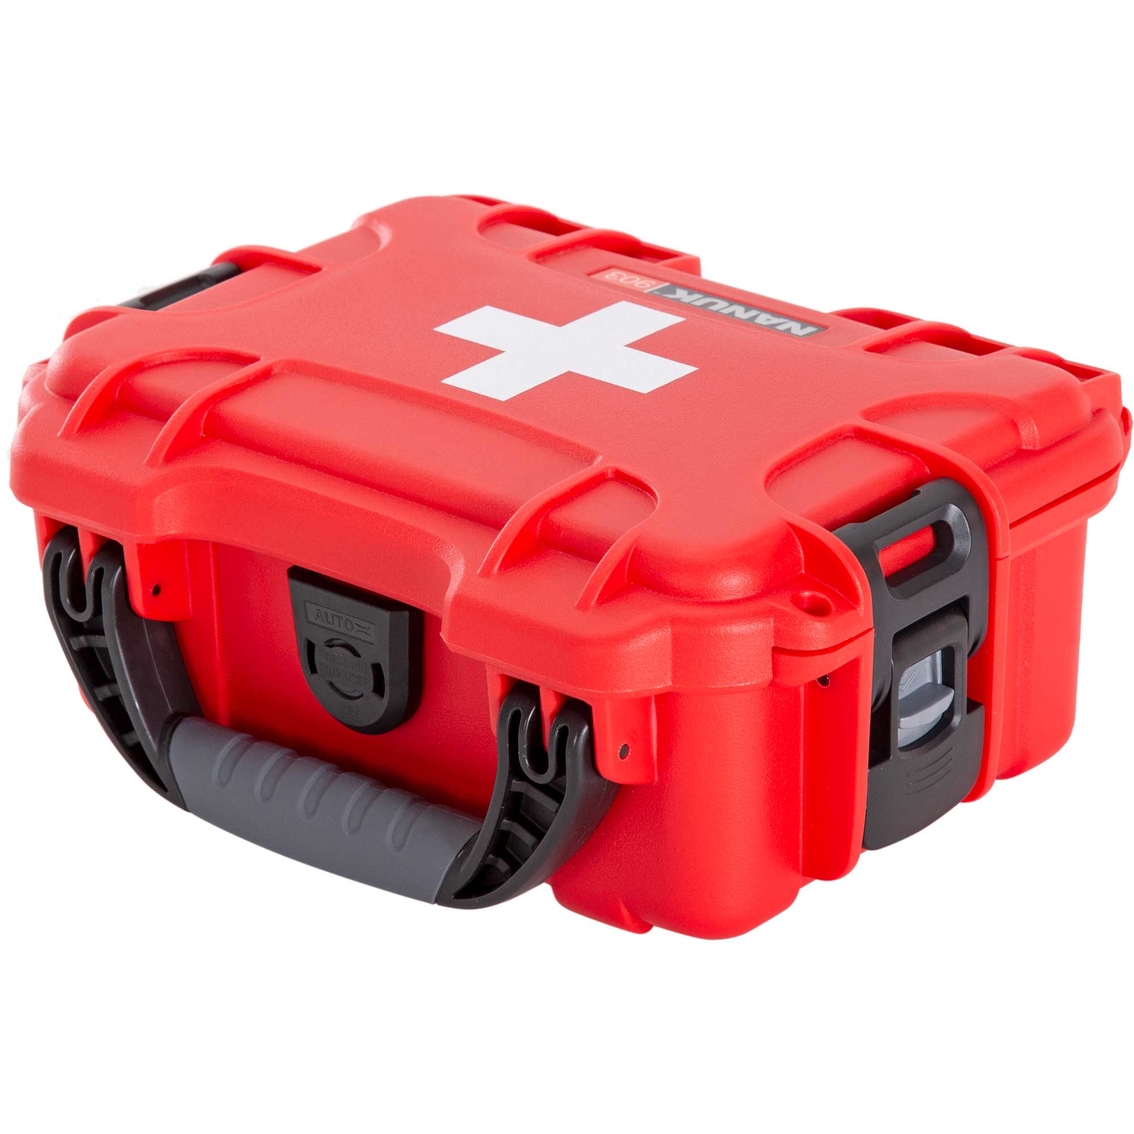 Nanuk Case 903 with First Aid Logo - Image 3 of 4